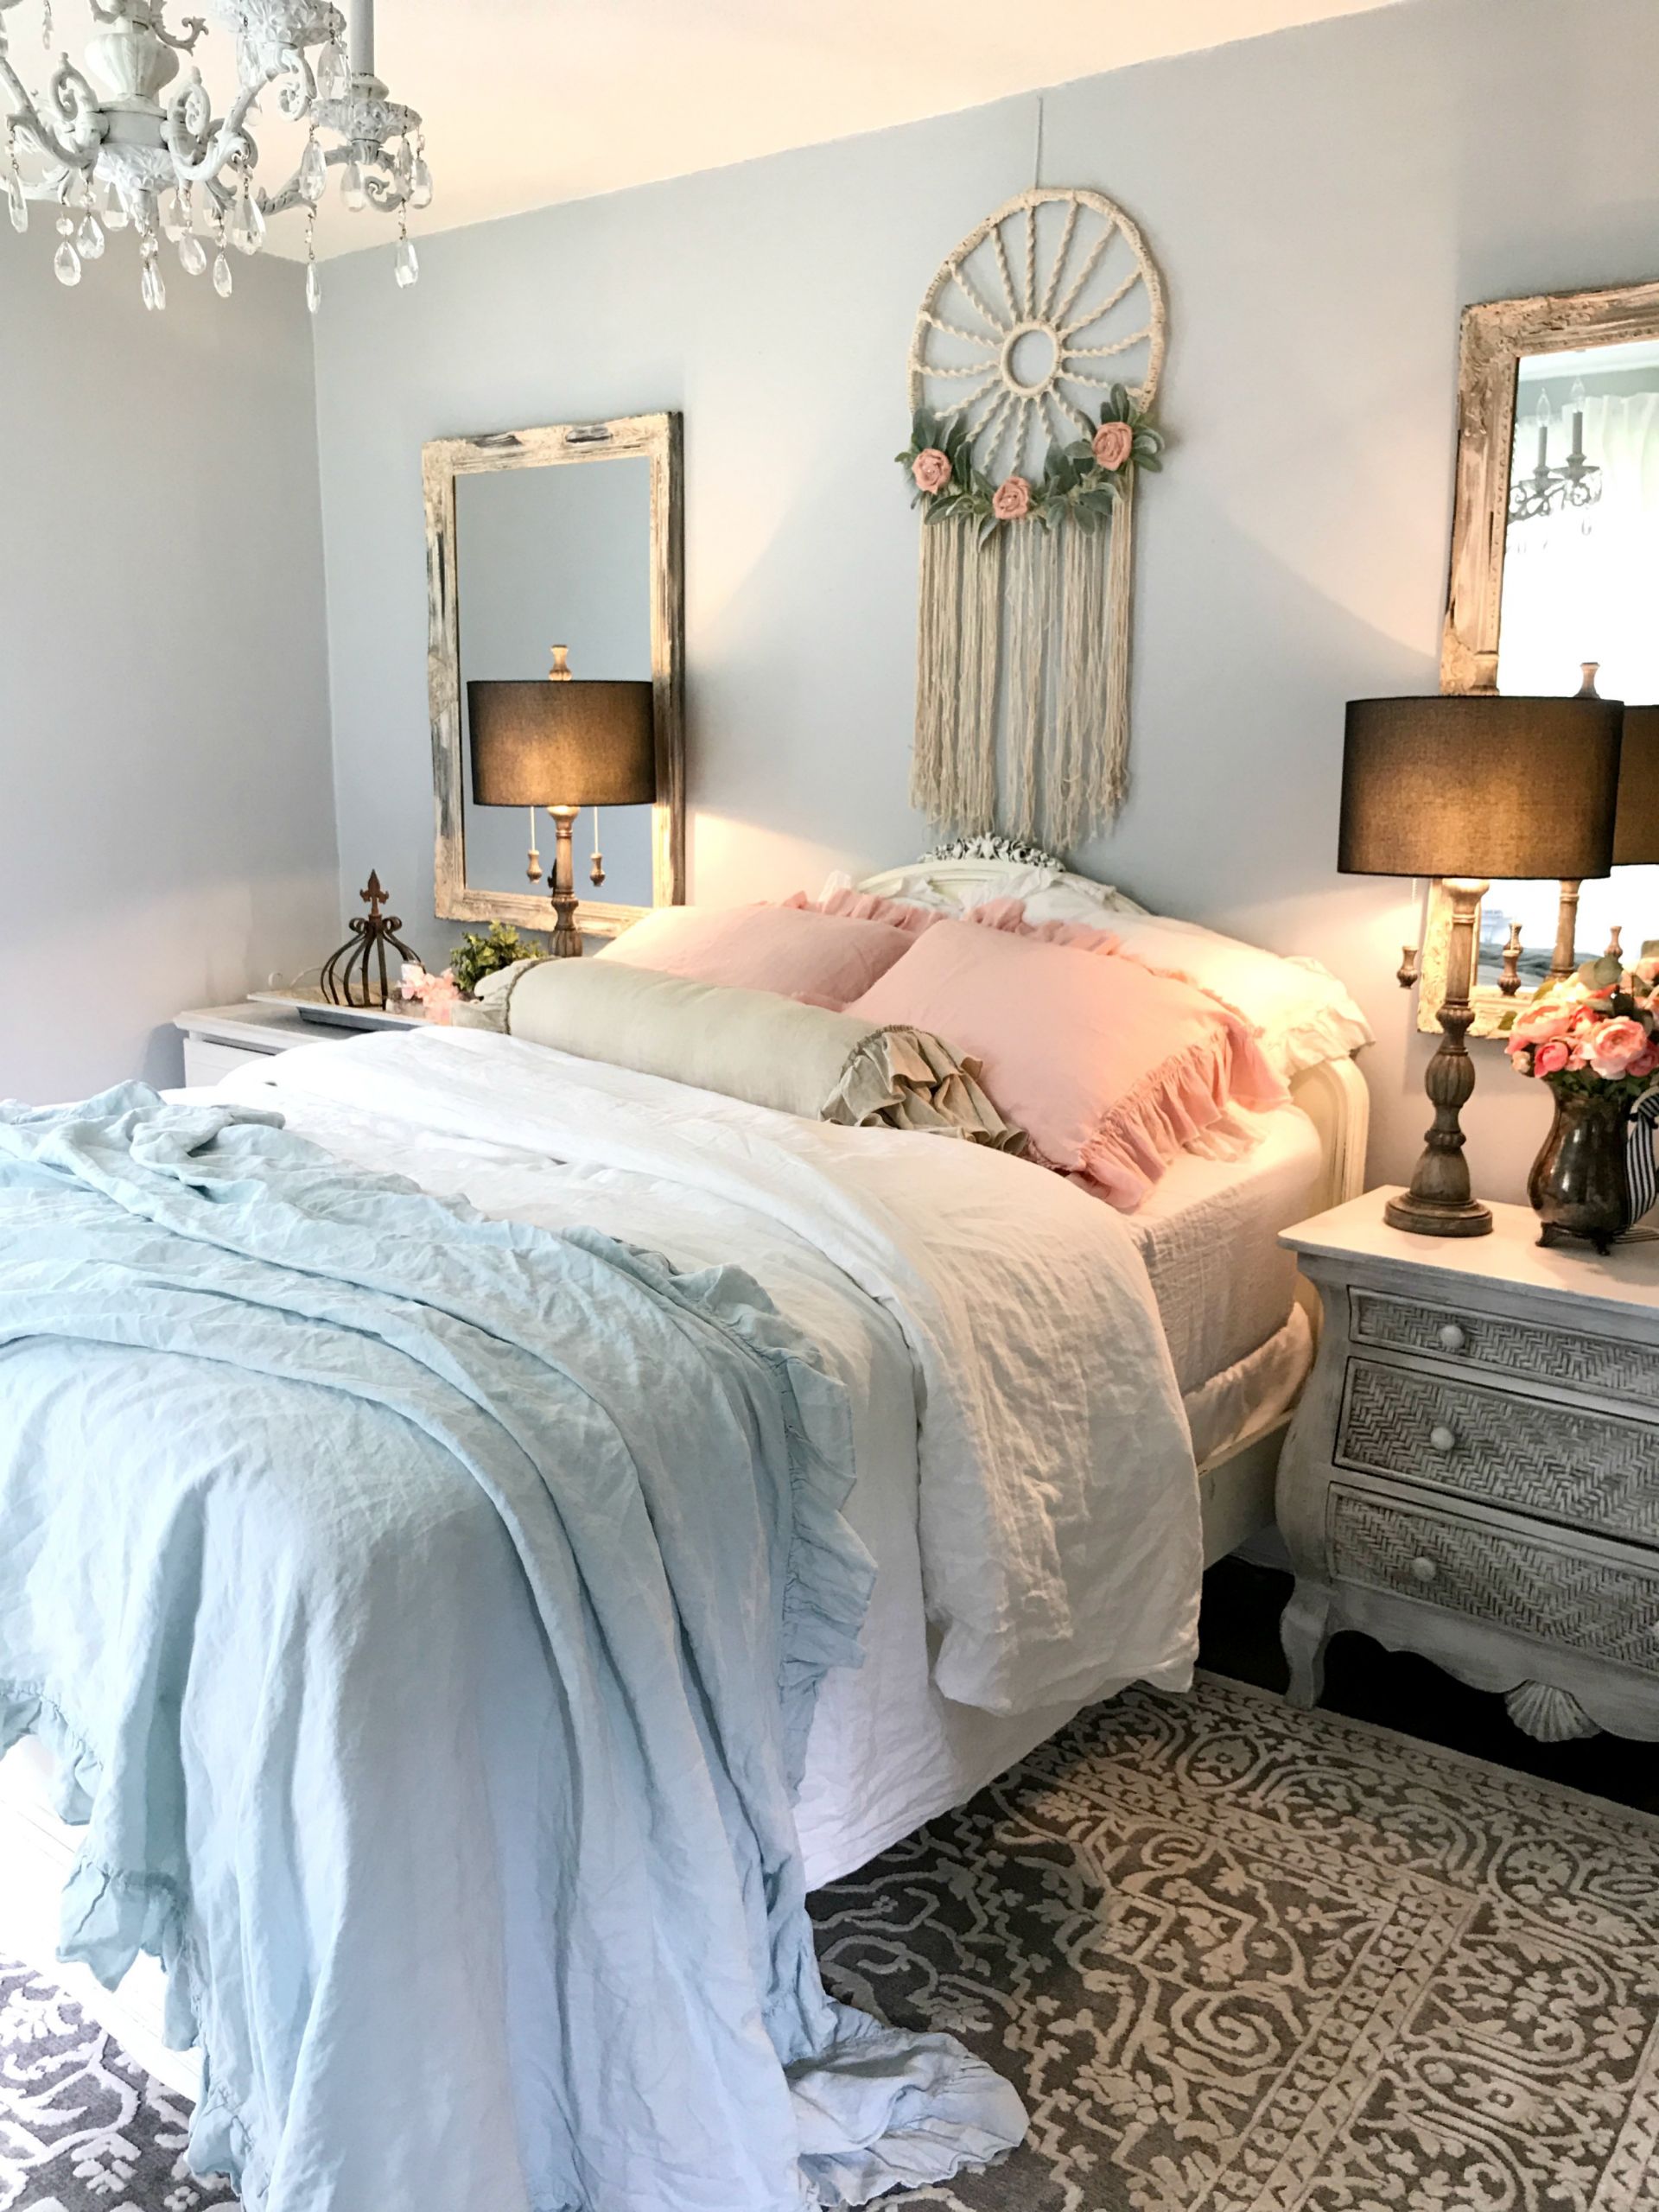 Pinterest Shabby Chic Bedrooms
 My Daughters Shabby Chic Bedroom Hallstrom Home